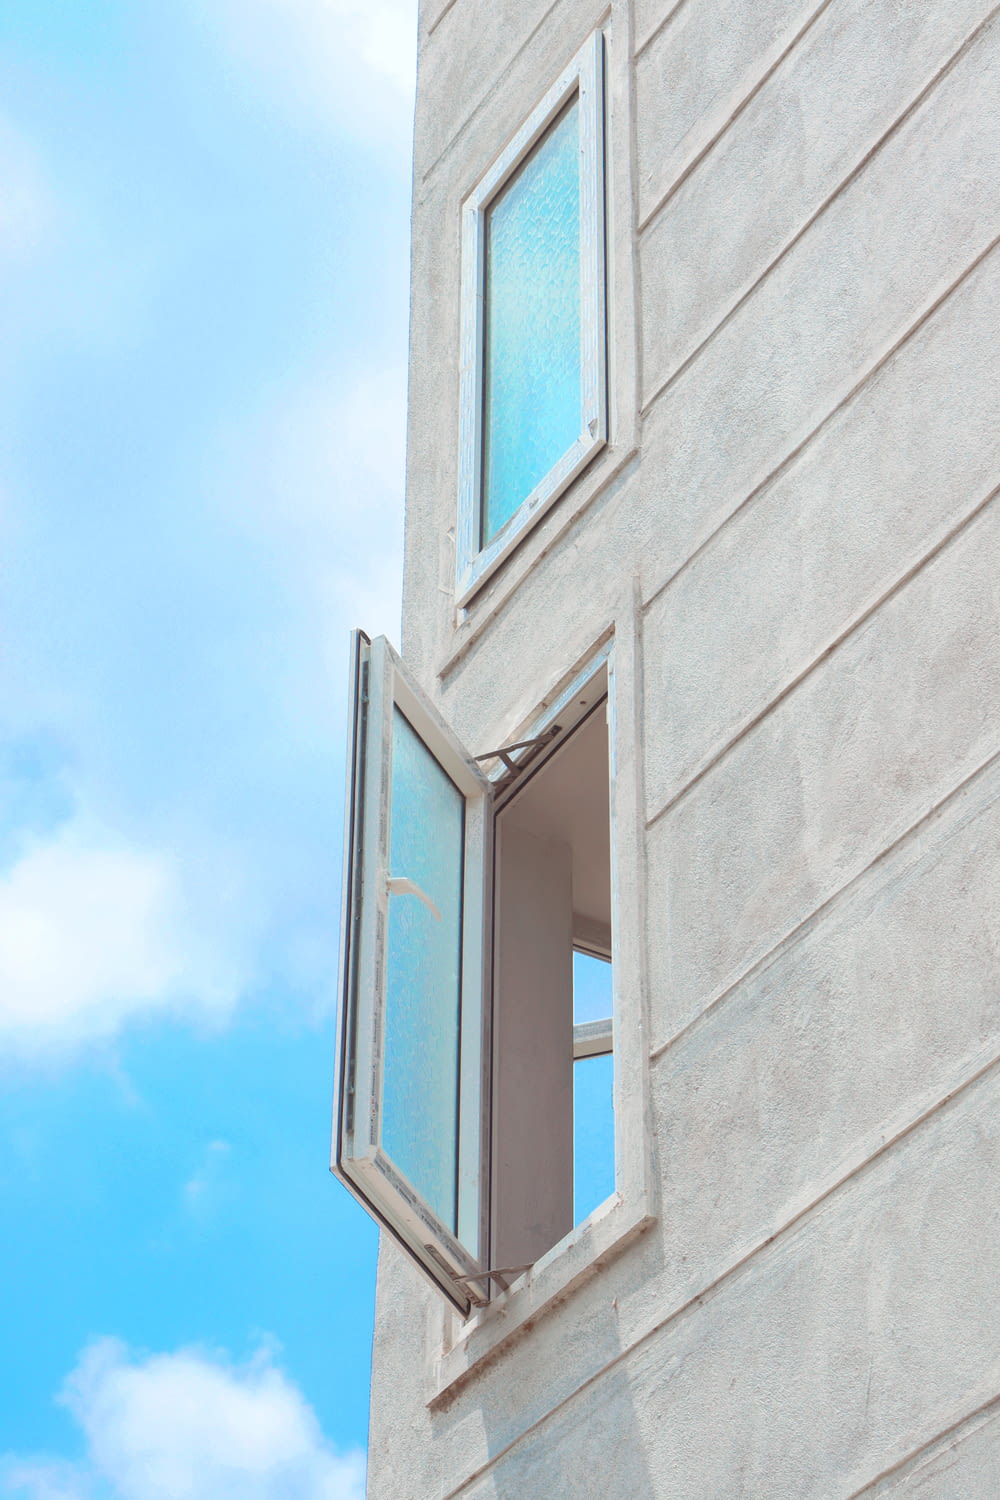 an open window on the side of a building